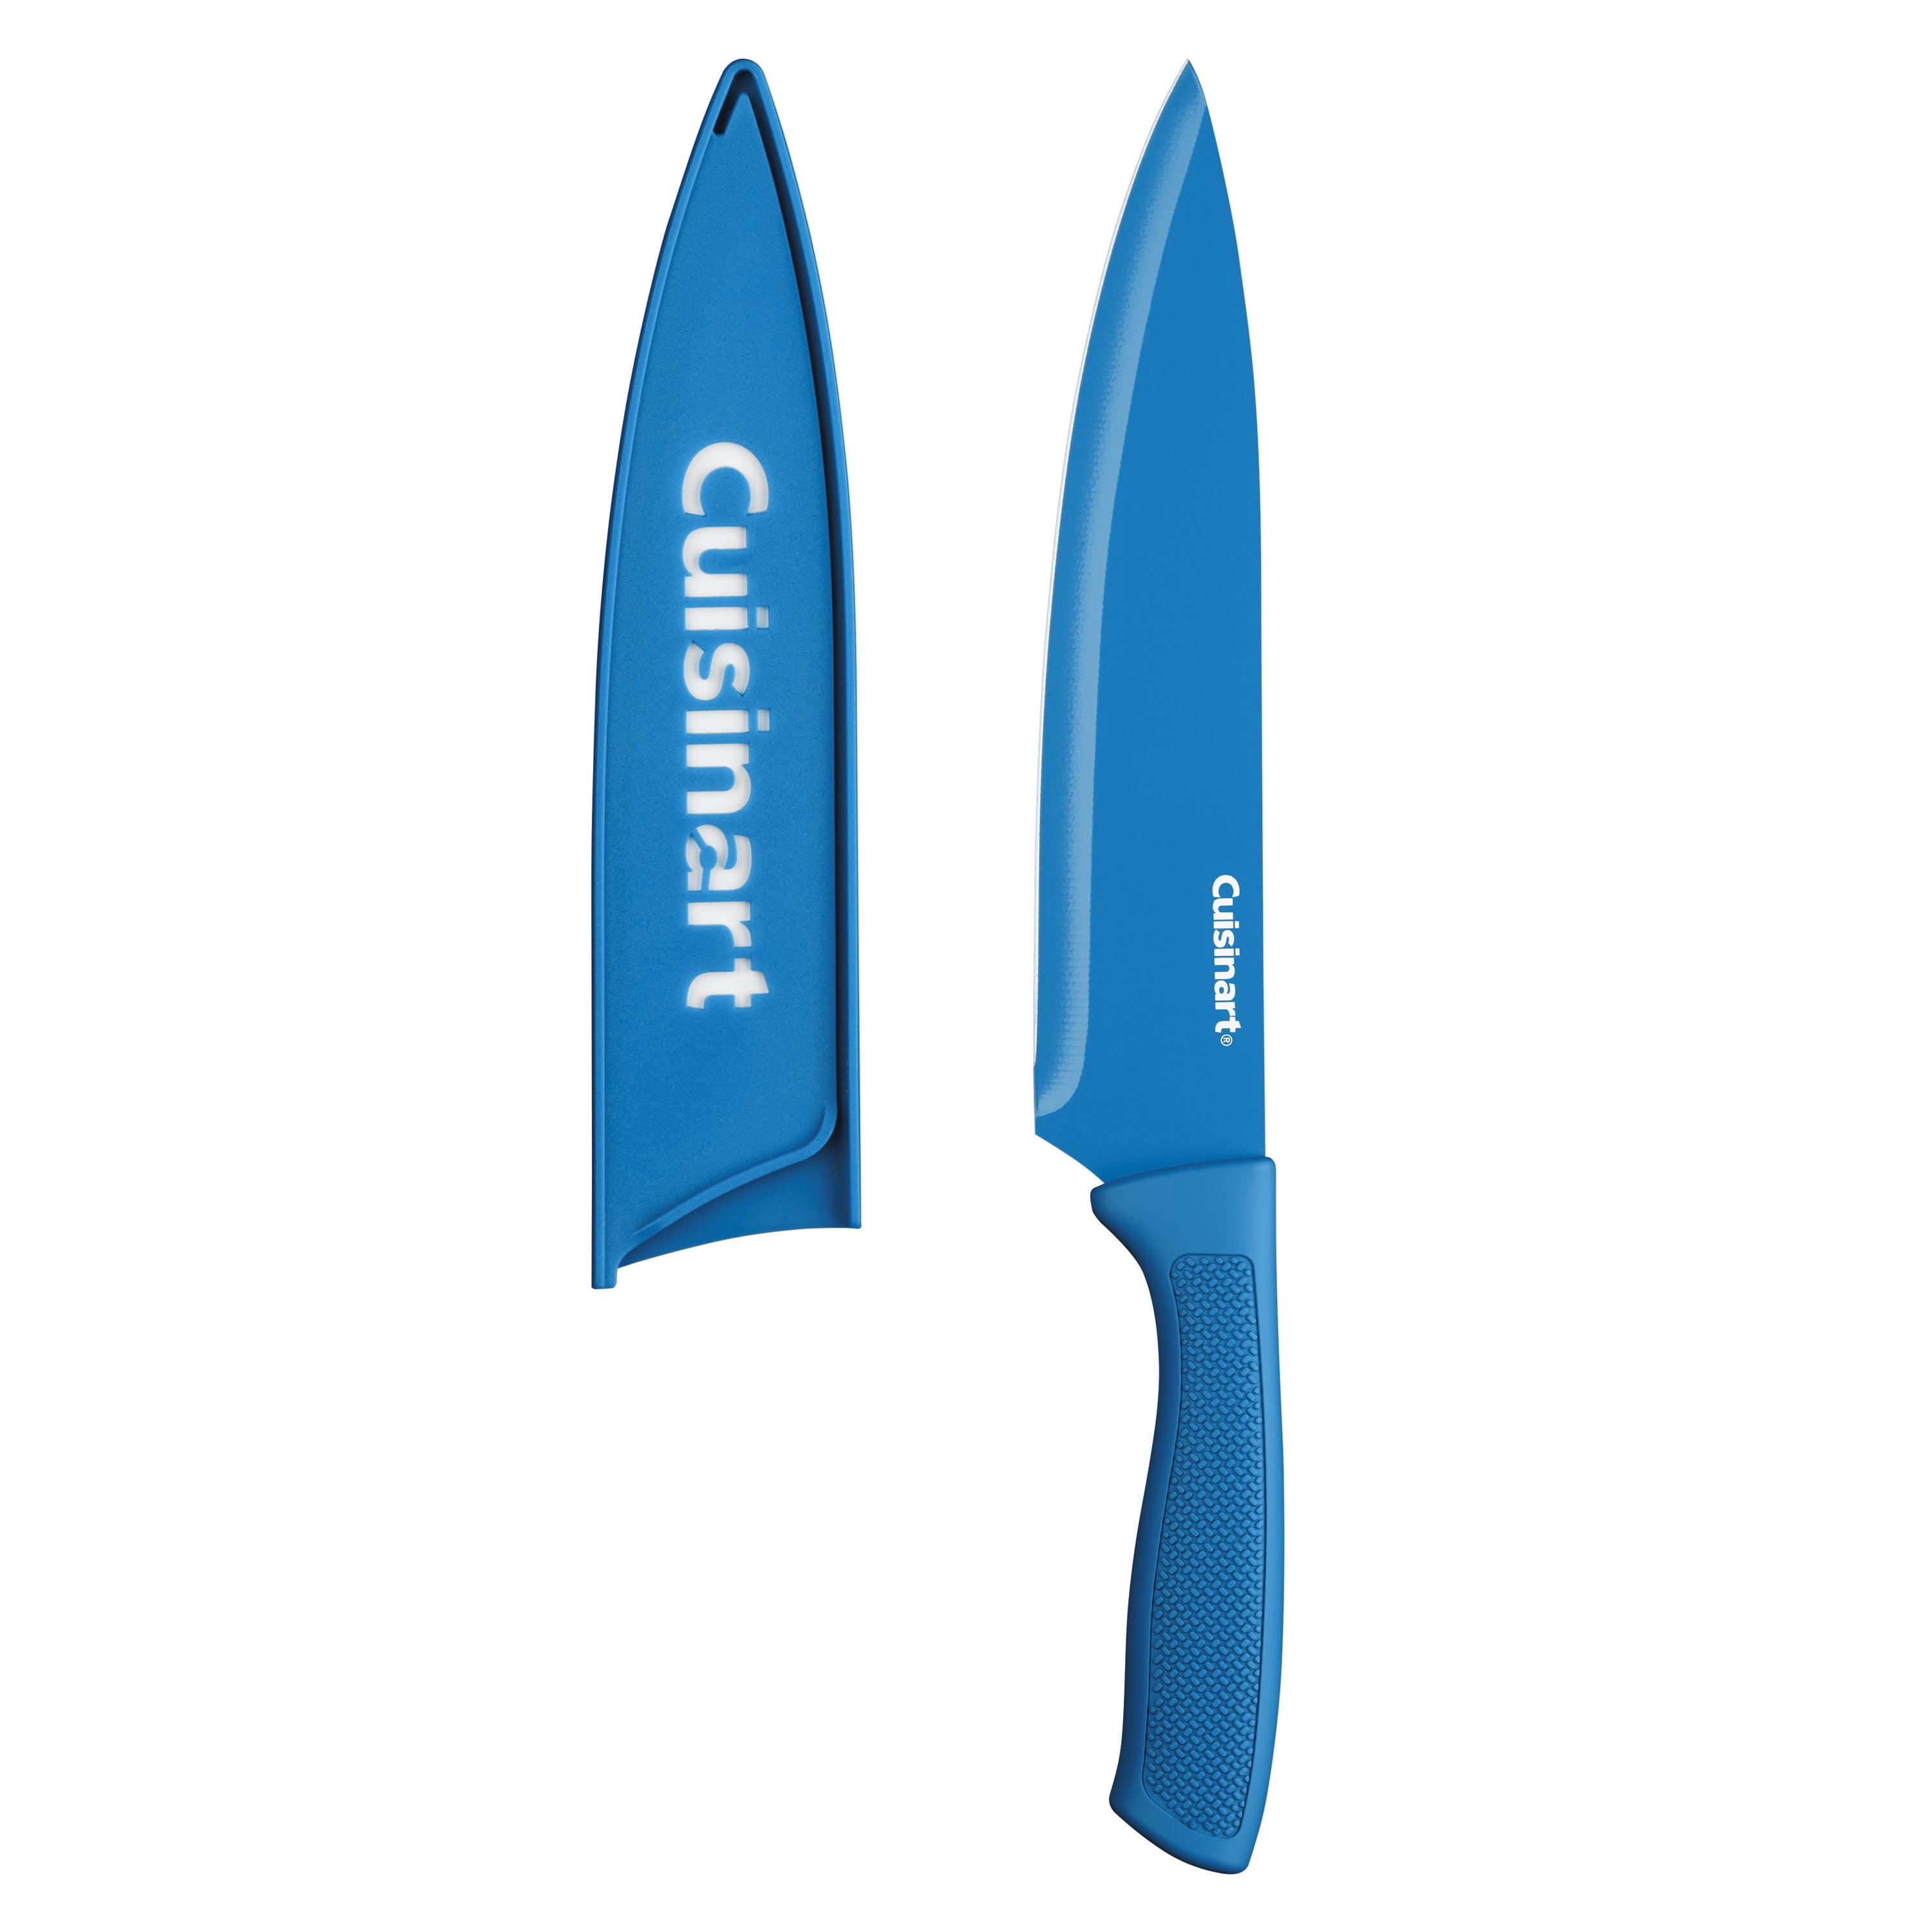 Cuisinart C55-12PCER1 12pc Ceramic Coated Color Knife Set with